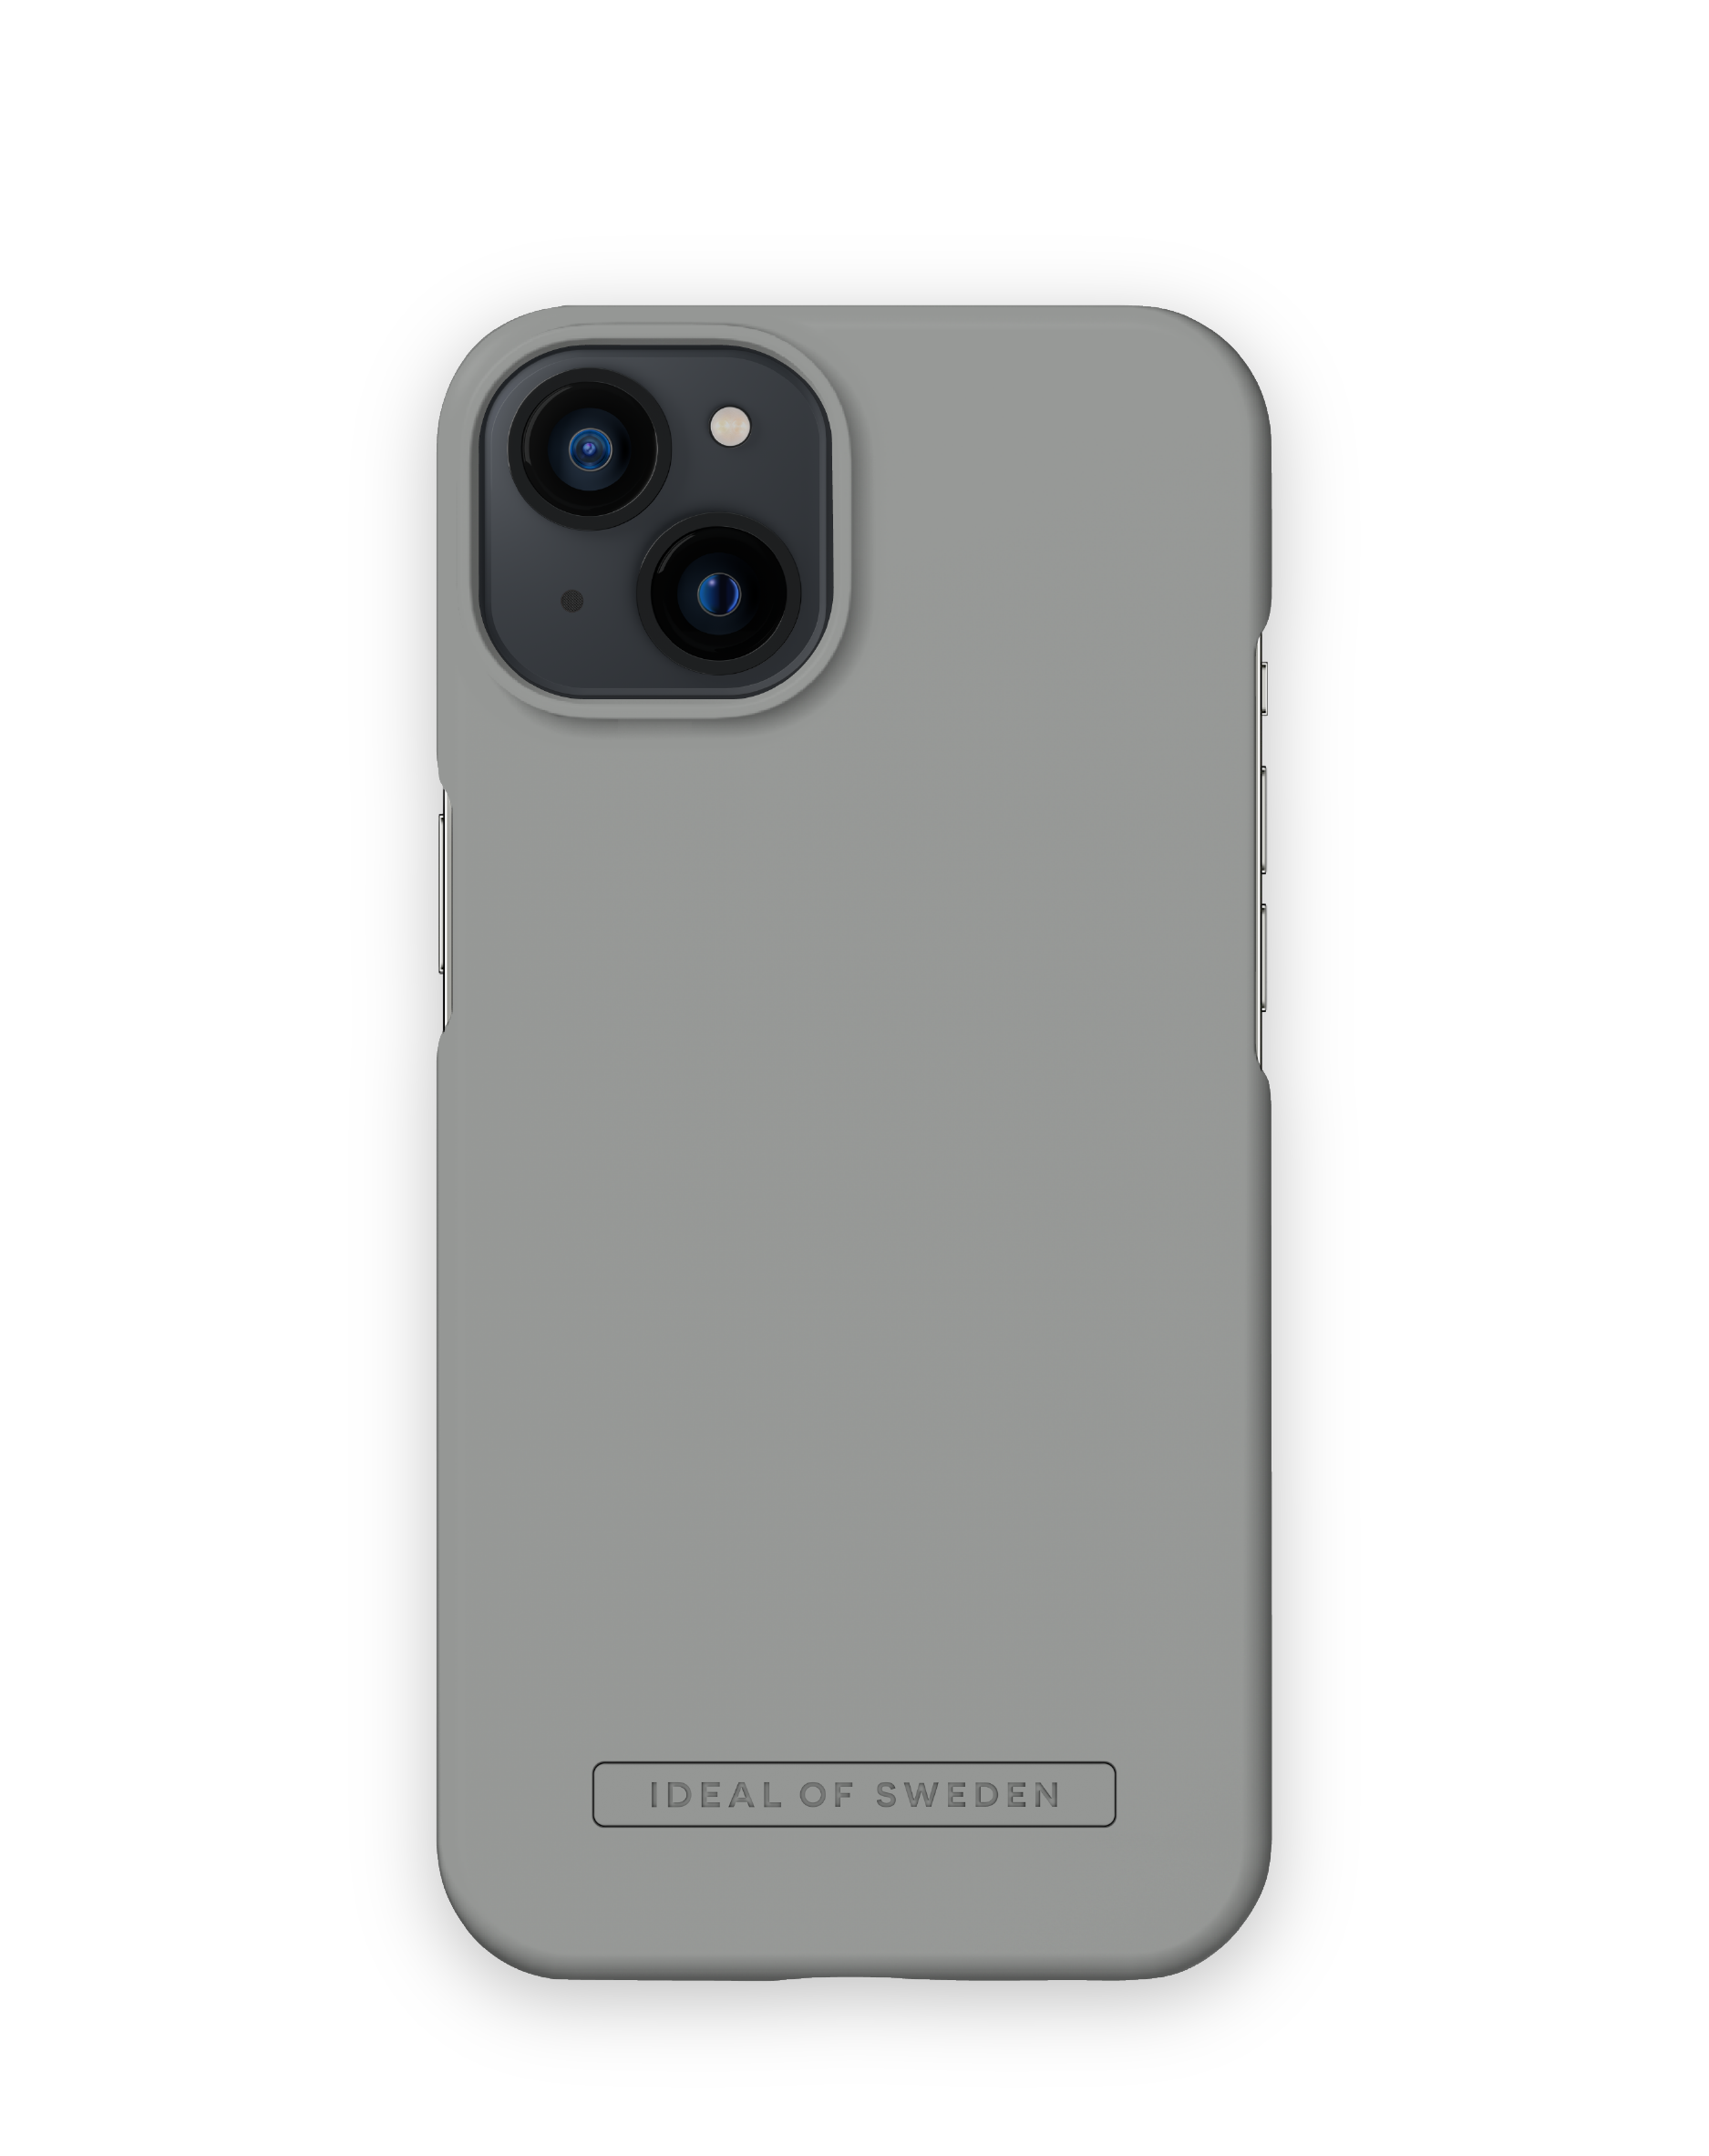 Backcover, Apple, IDFCSS22-I2161-409, Grey IDEAL OF iPhone 13, SWEDEN Ash